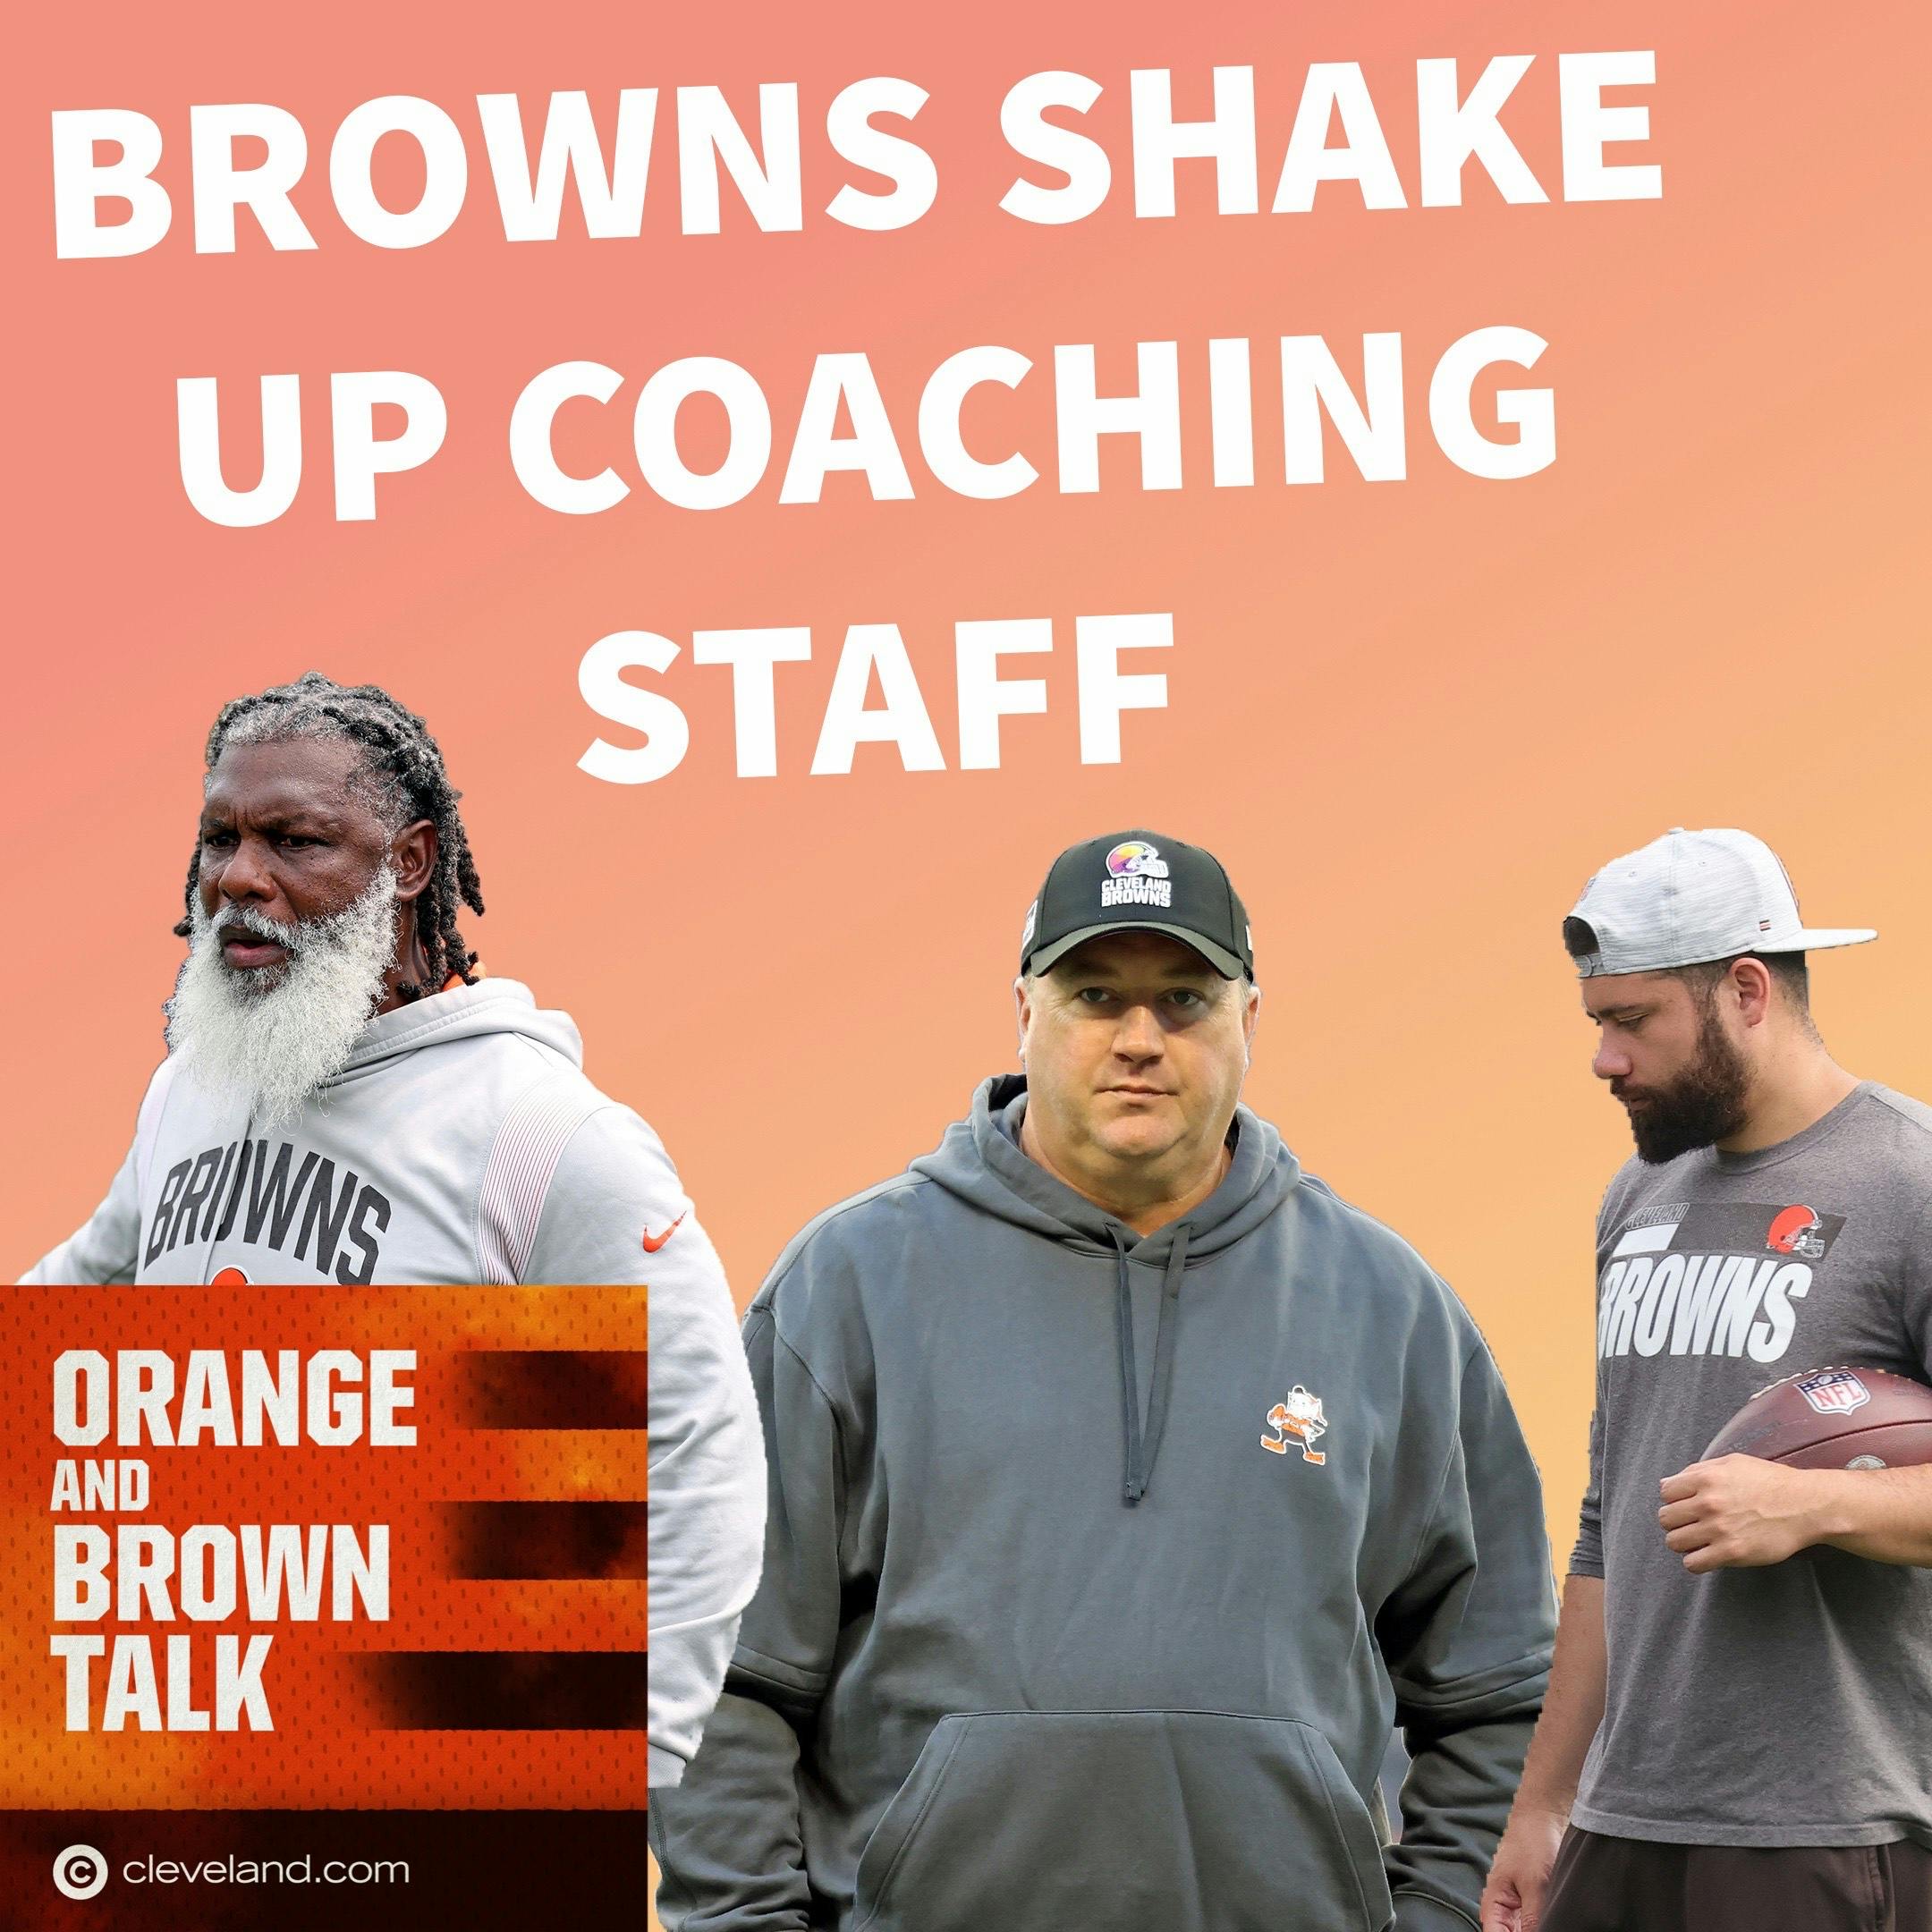 Browns shake up their coaching staff: What’s next for the offense?